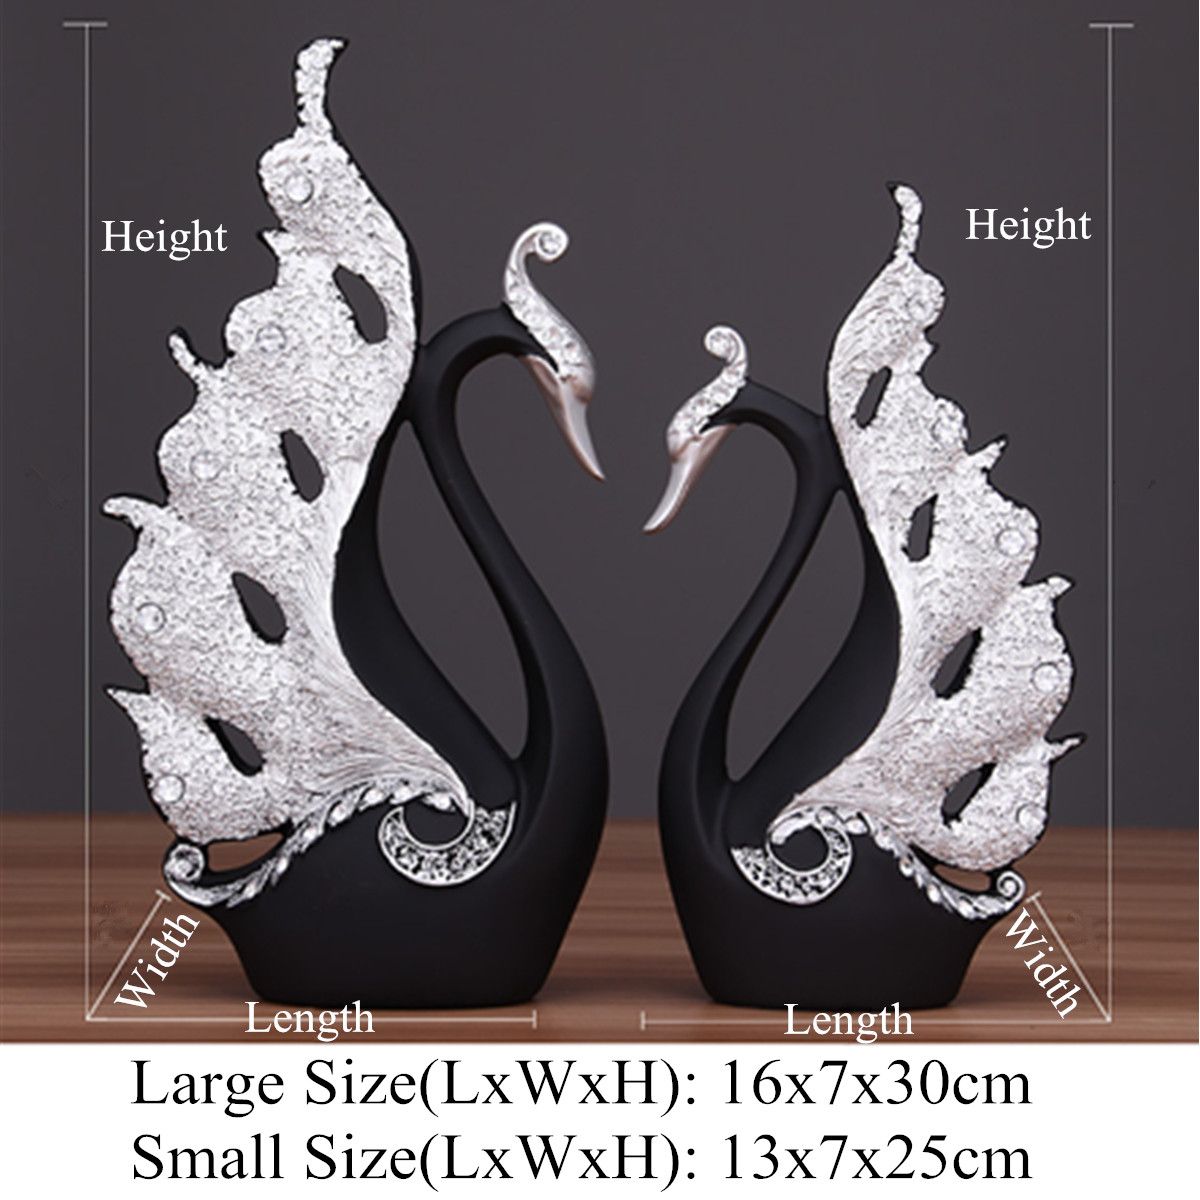 Couple-Swan-Ornament-House-Decorations-Accessories-Living-Room-TV-Cabinet-Wedding-Gifts-1490856